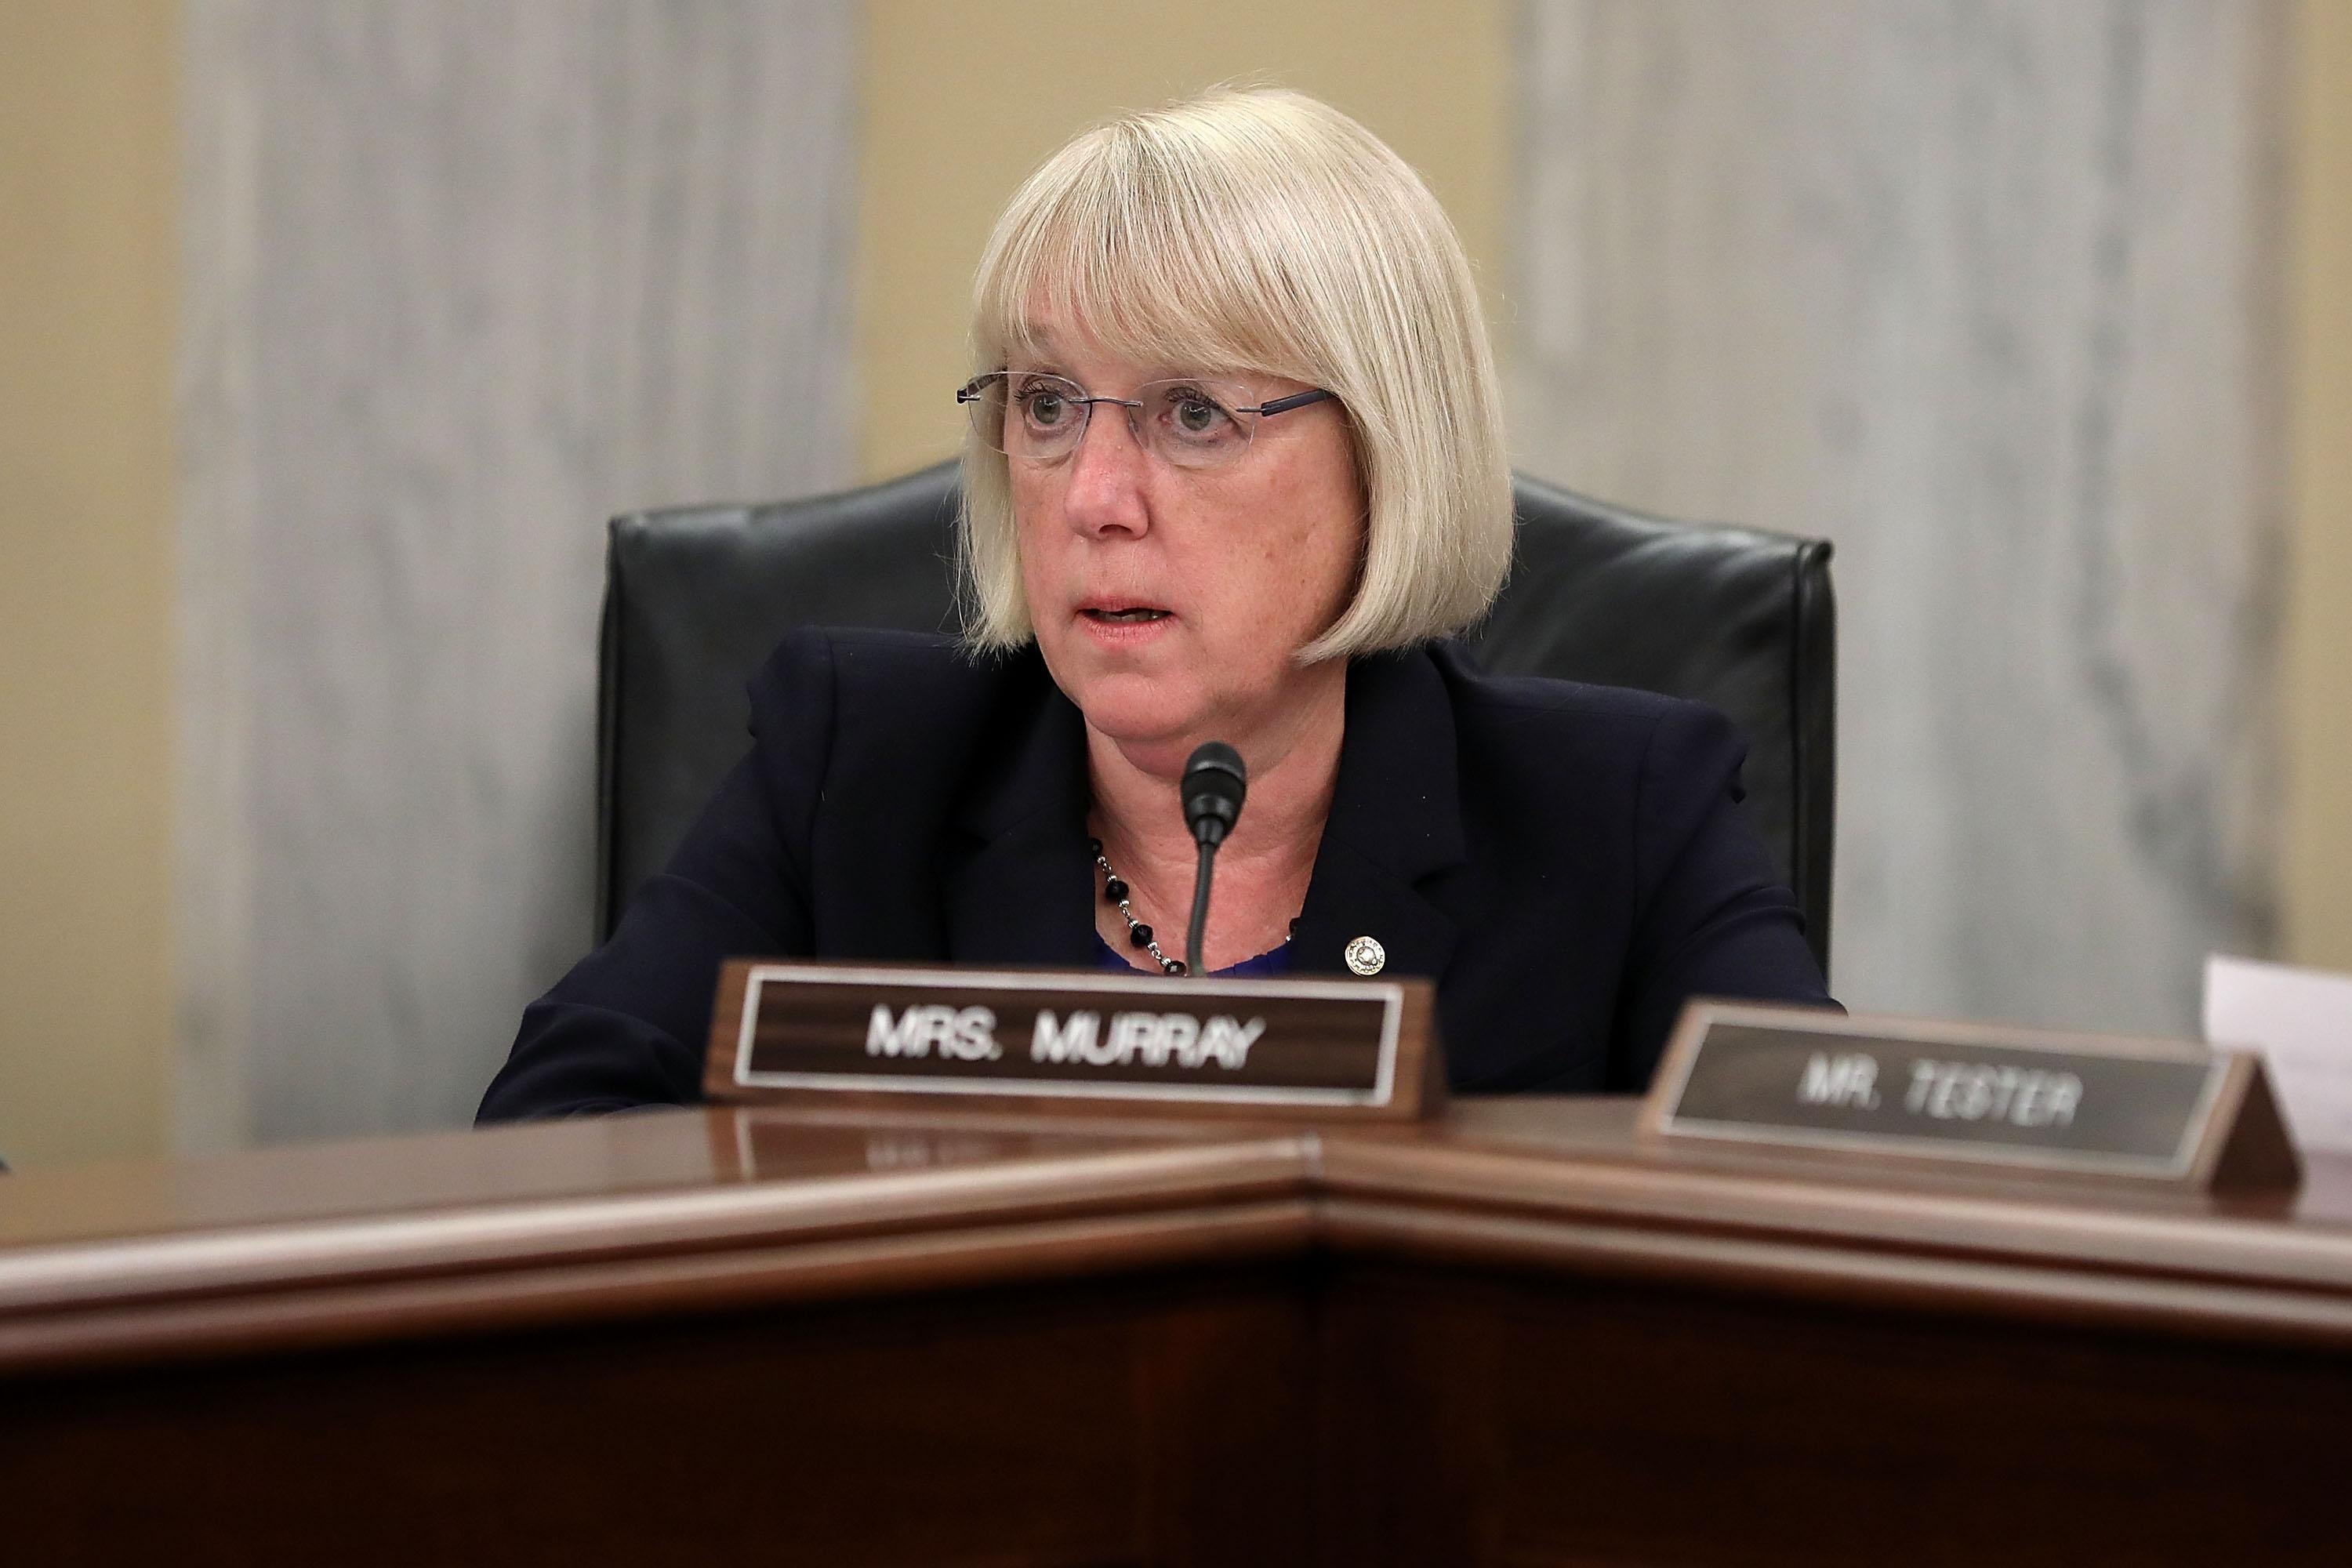 WASHINGTON, DC - JUNE 07:  Senate Veterans' Affairs Committe member Sen. Patty Murray (D-WA) questions Veterans Affairs Secretary David Shulkin during a hearing in the Russell Senate Office Building on Capitol Hill June 7, 2017 in Washington, DC. Shulkin testified about the VA Choice Care program and how best to change it to better serve veterans.  (Photo by Chip Somodevilla/Getty Images)